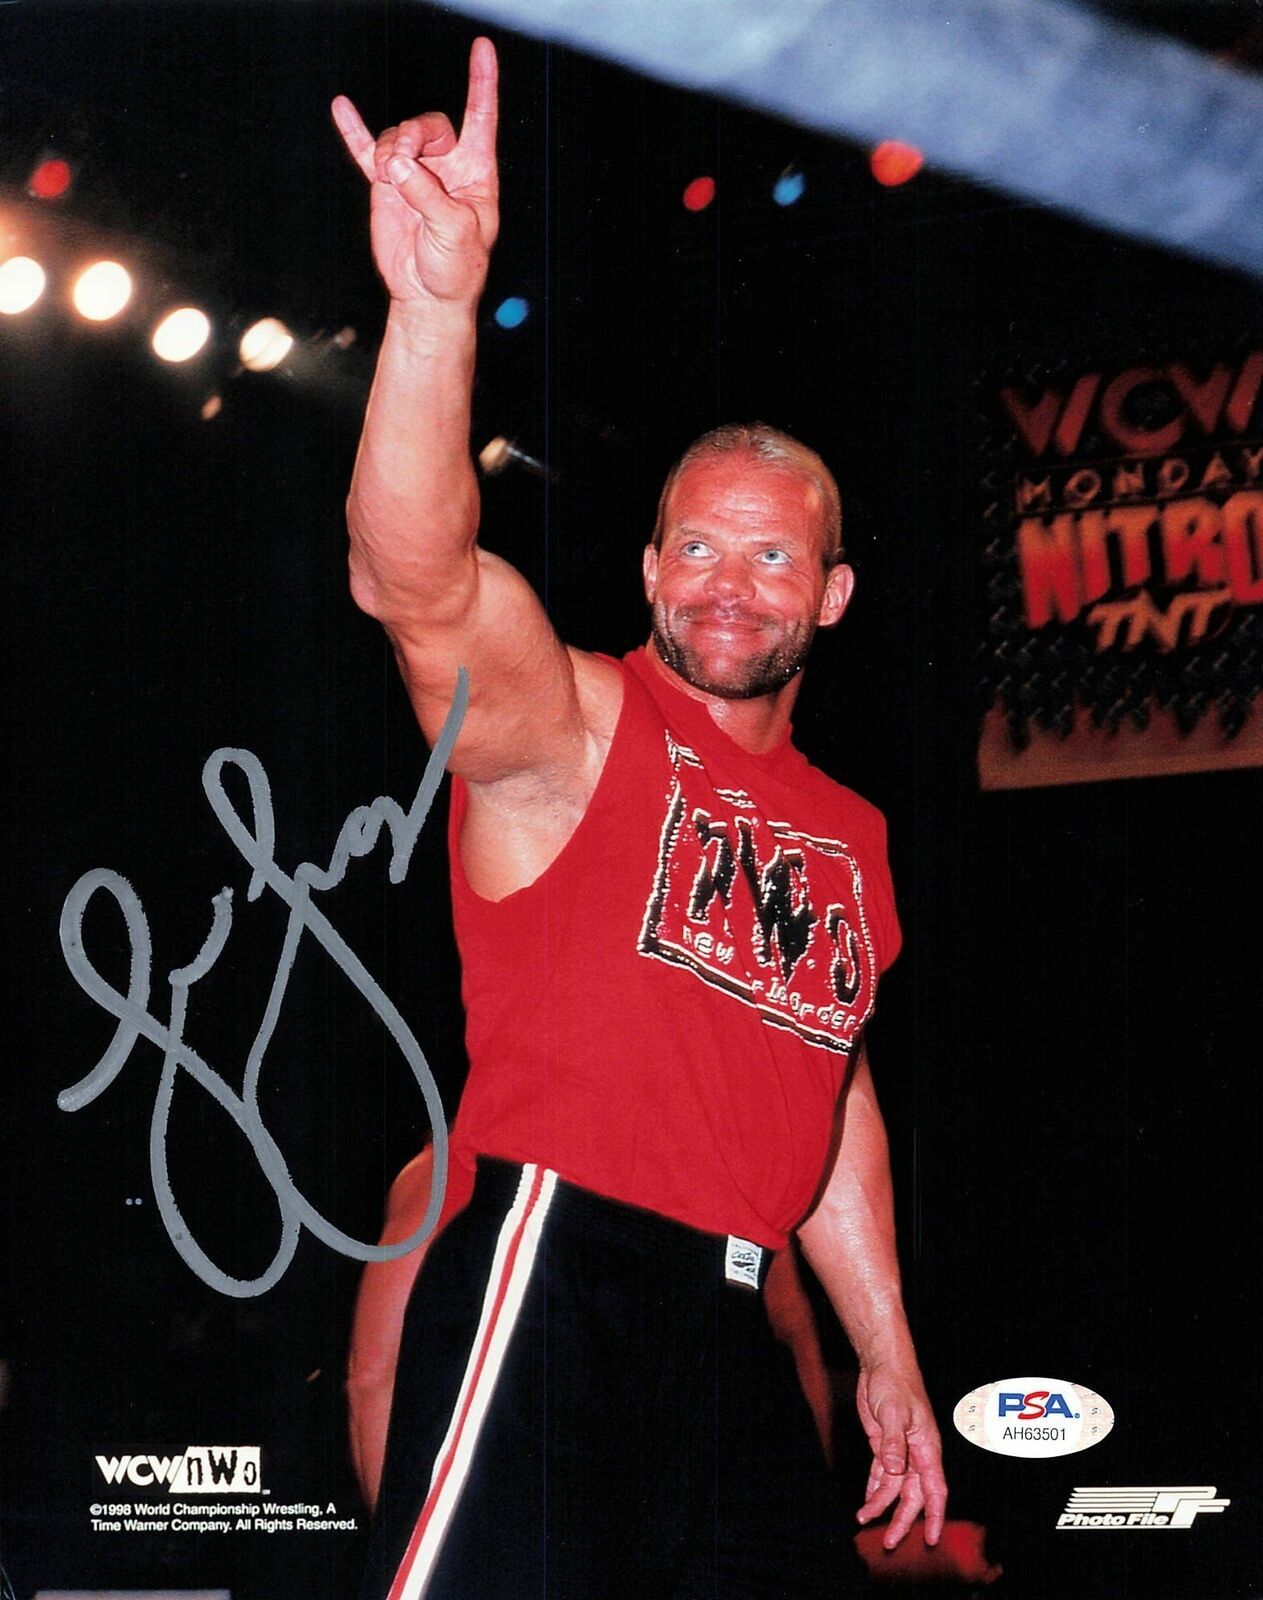 Primary image for Lex Luger Lawrence Pfohl signed 8x10 photo PSA/DNA COA WWE Autographed Wrestling